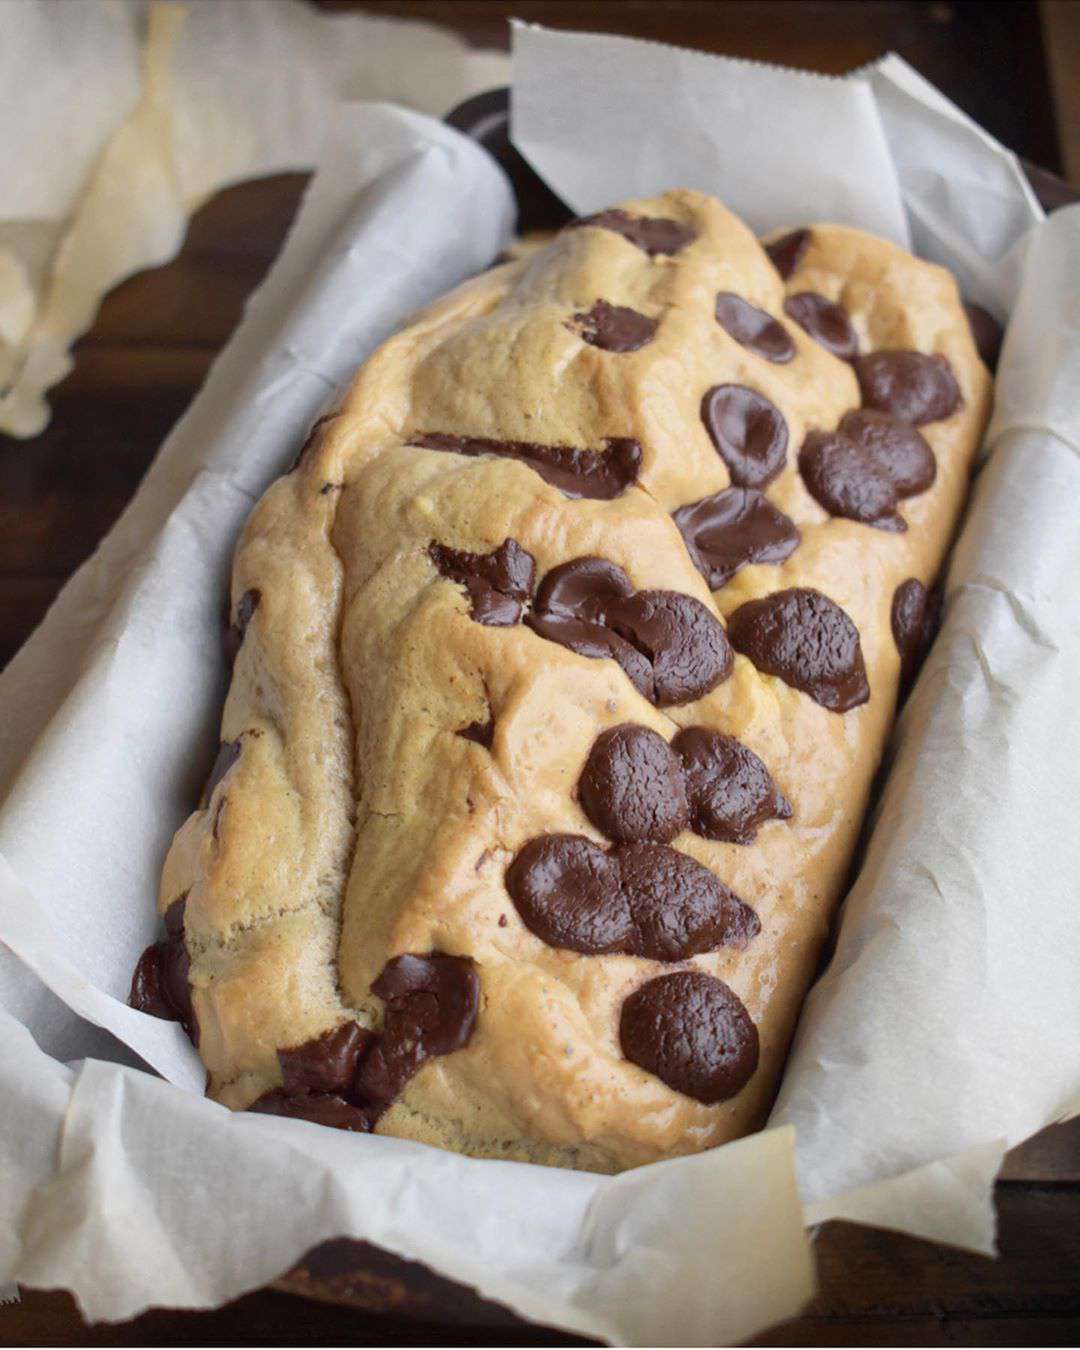 This 4-Ingredient Cookie Dough Bread Doesn't Need Flour, Yeast, or Sugar